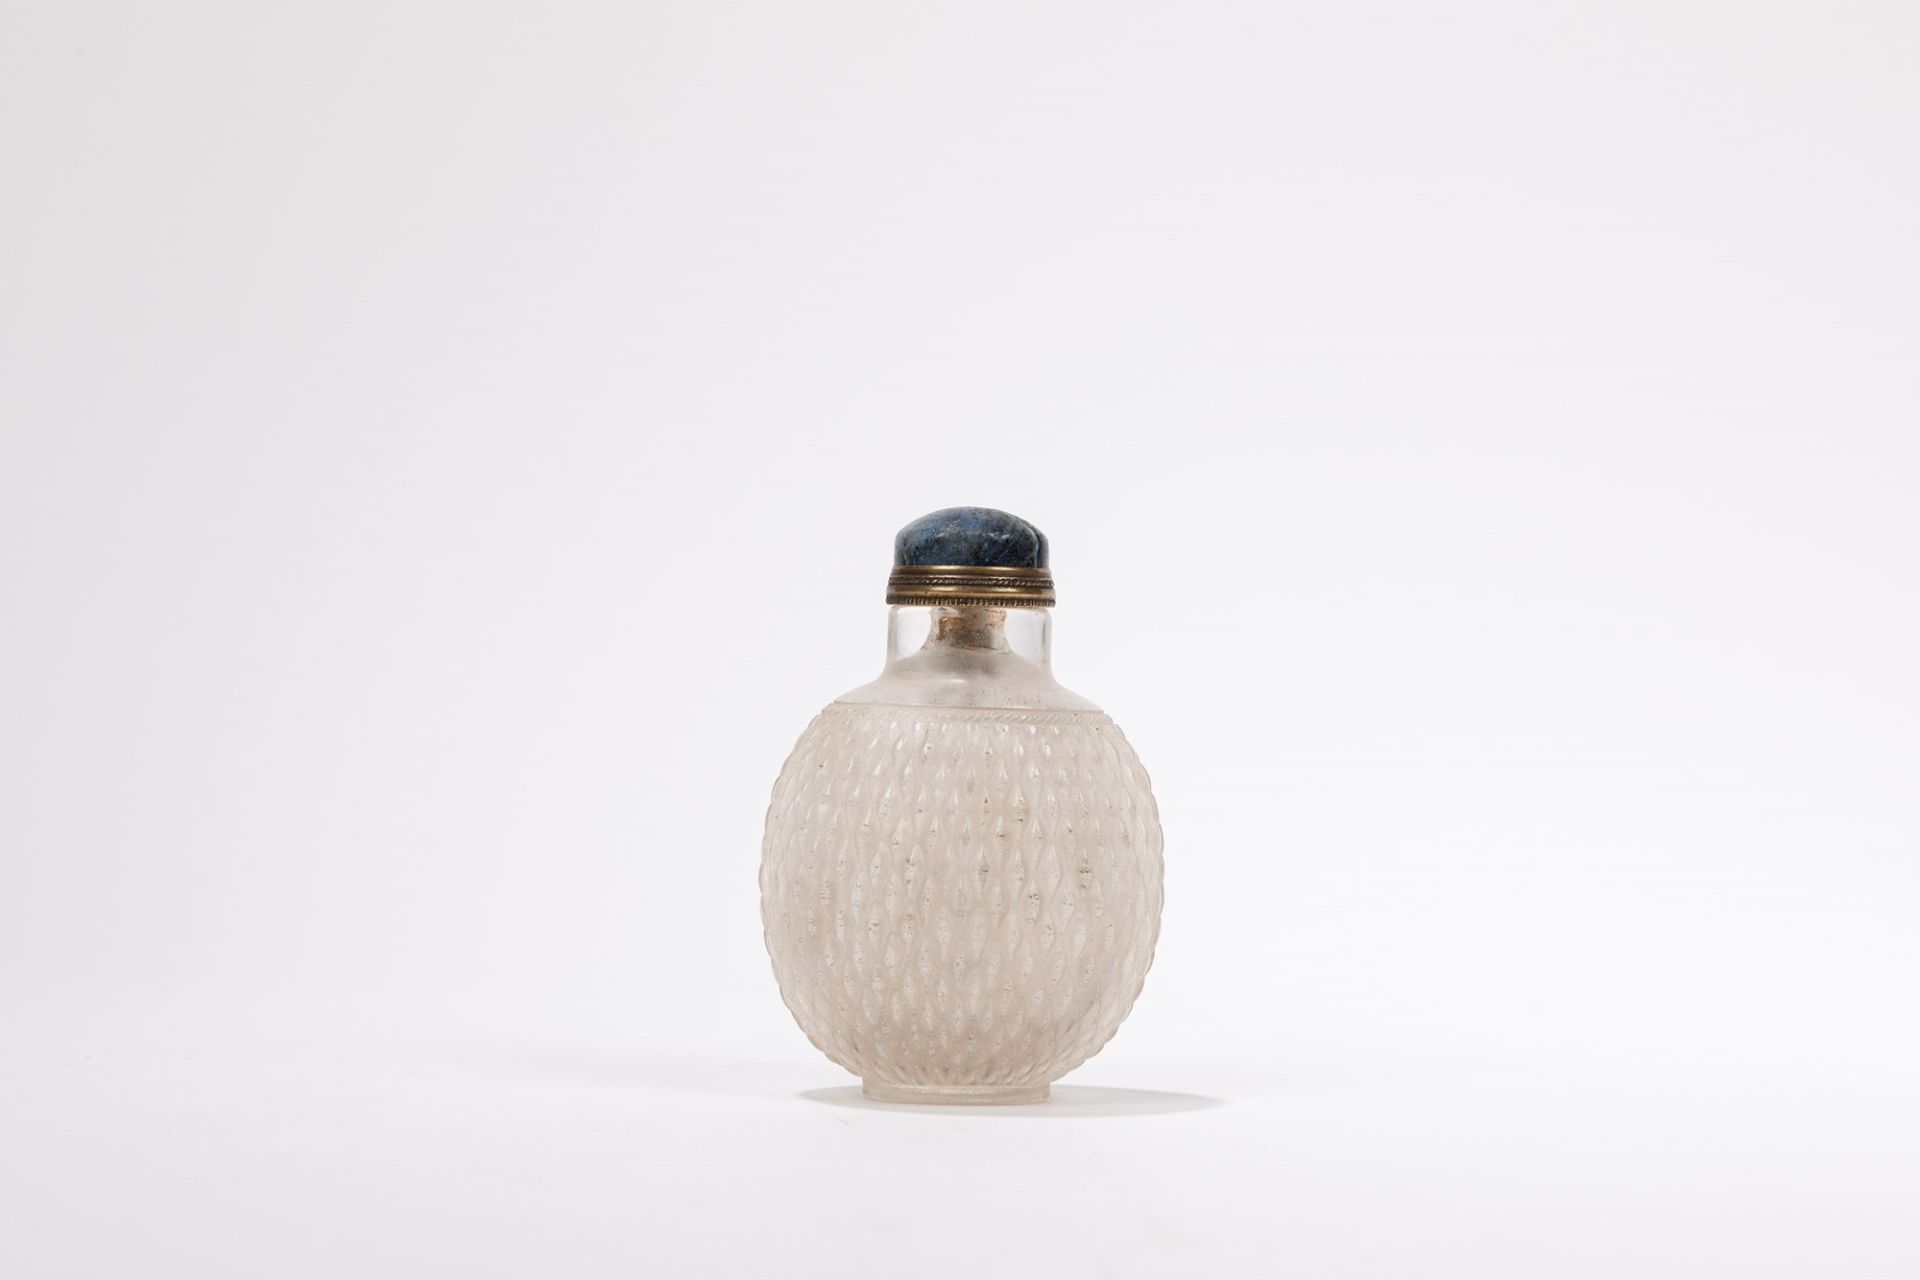 A CRYSTAL ROCK SNUFF BOTTLE, China, Qing dynasty, 19th century